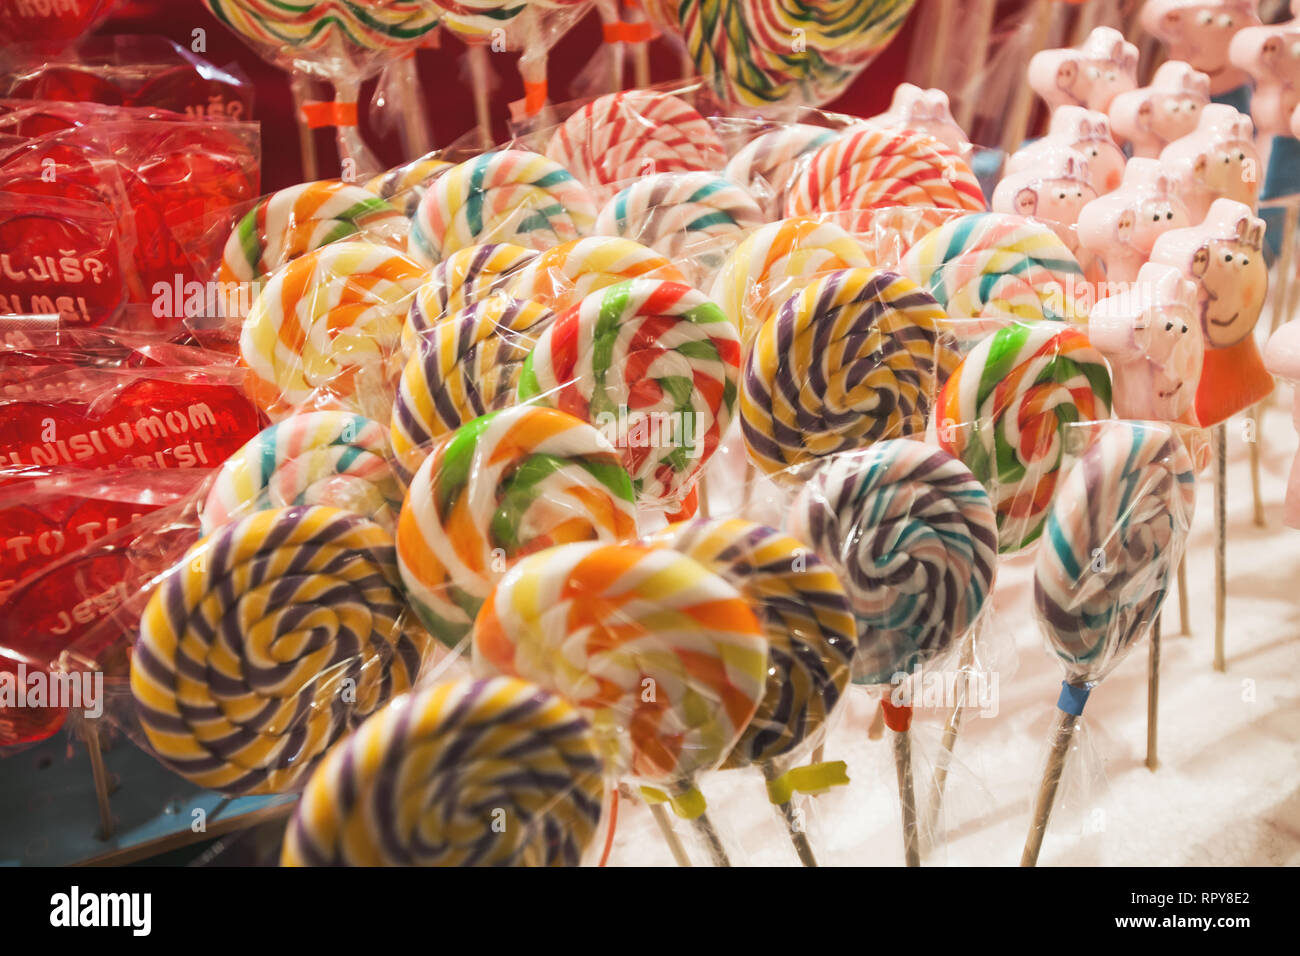 Candy_shop High Resolution Stock Photography and Images - Alamy